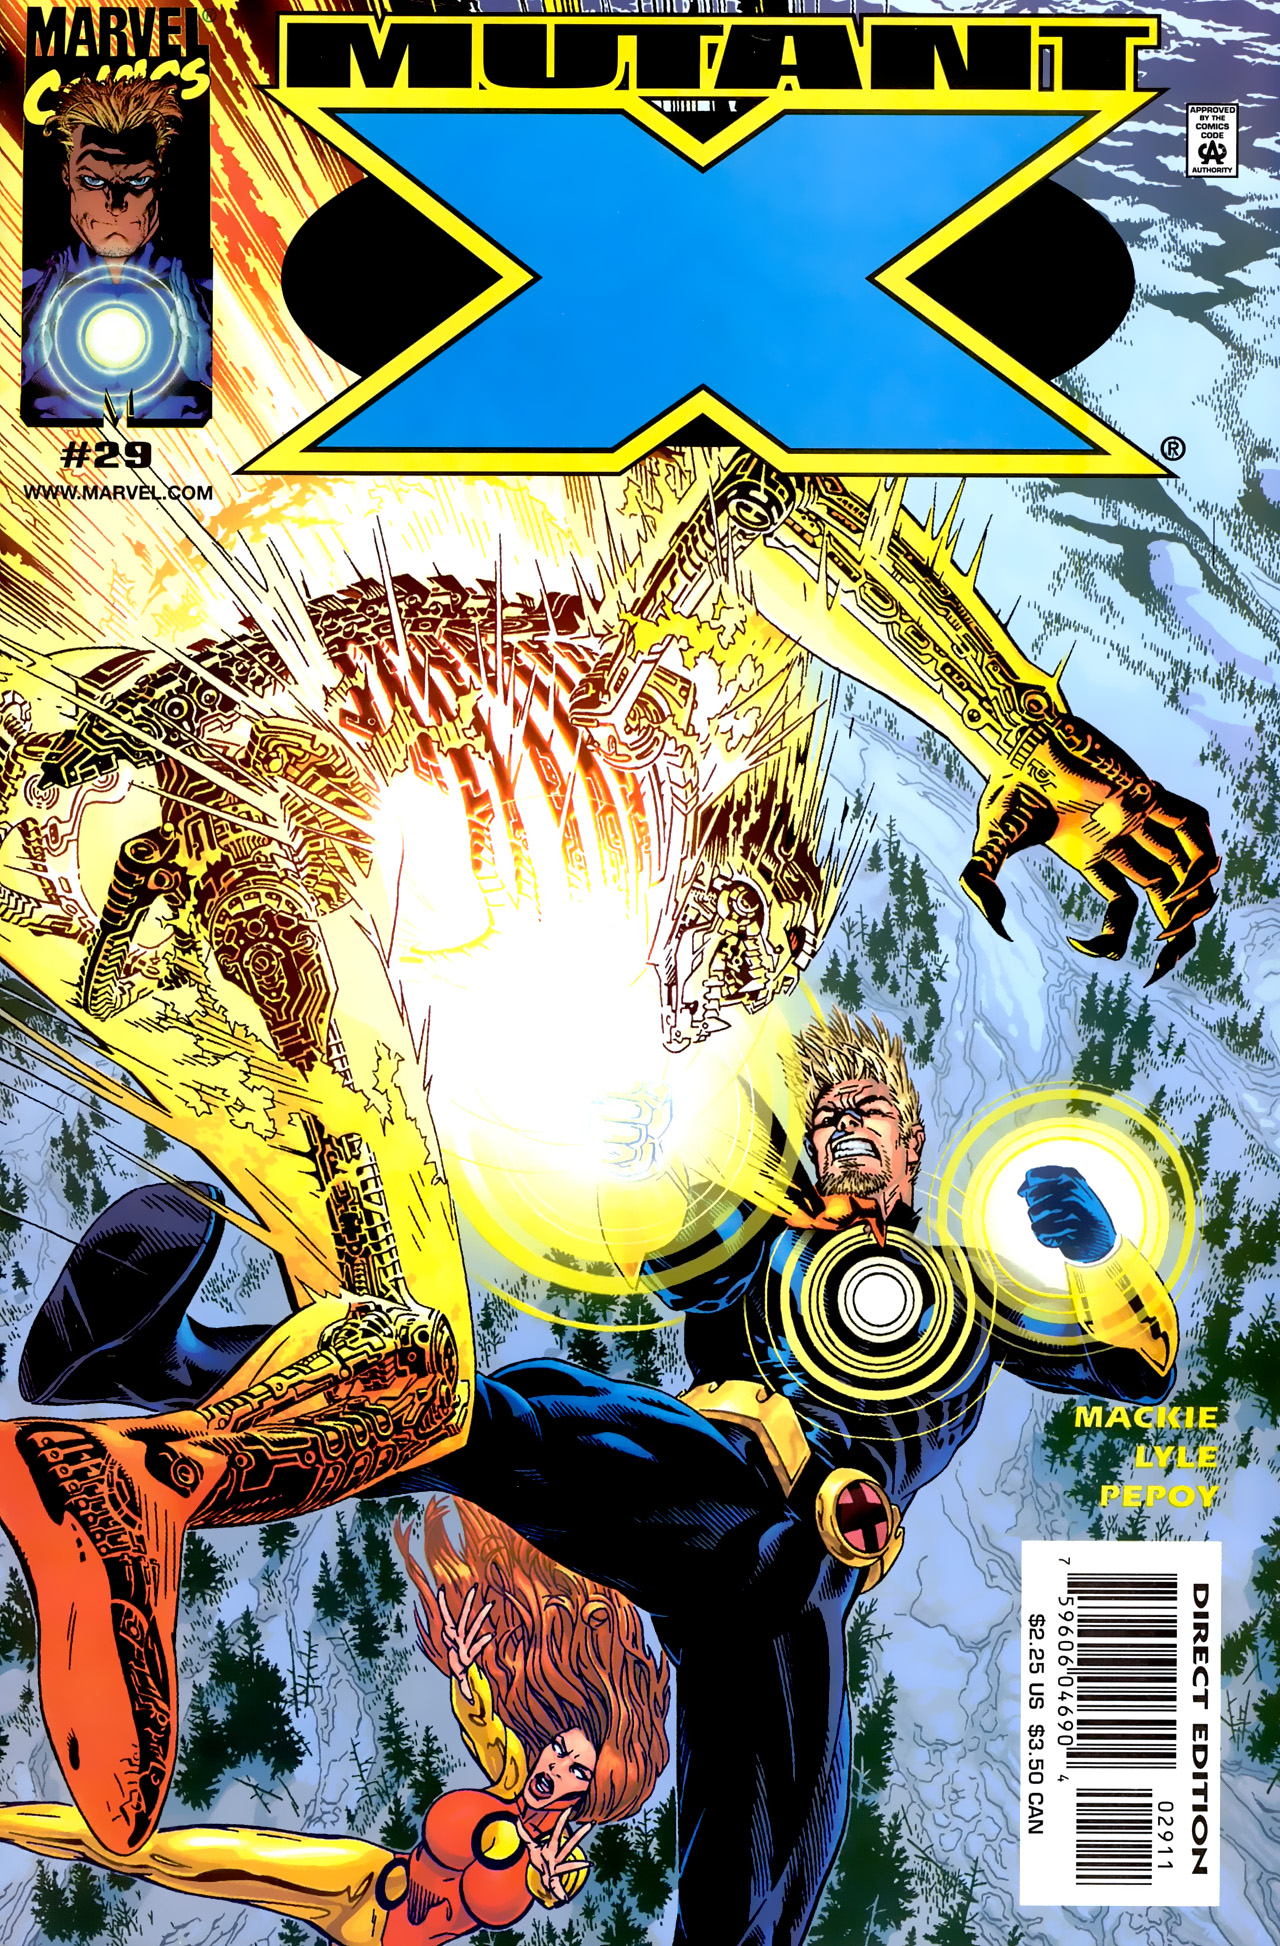 Read online Mutant X comic -  Issue #29 - 1